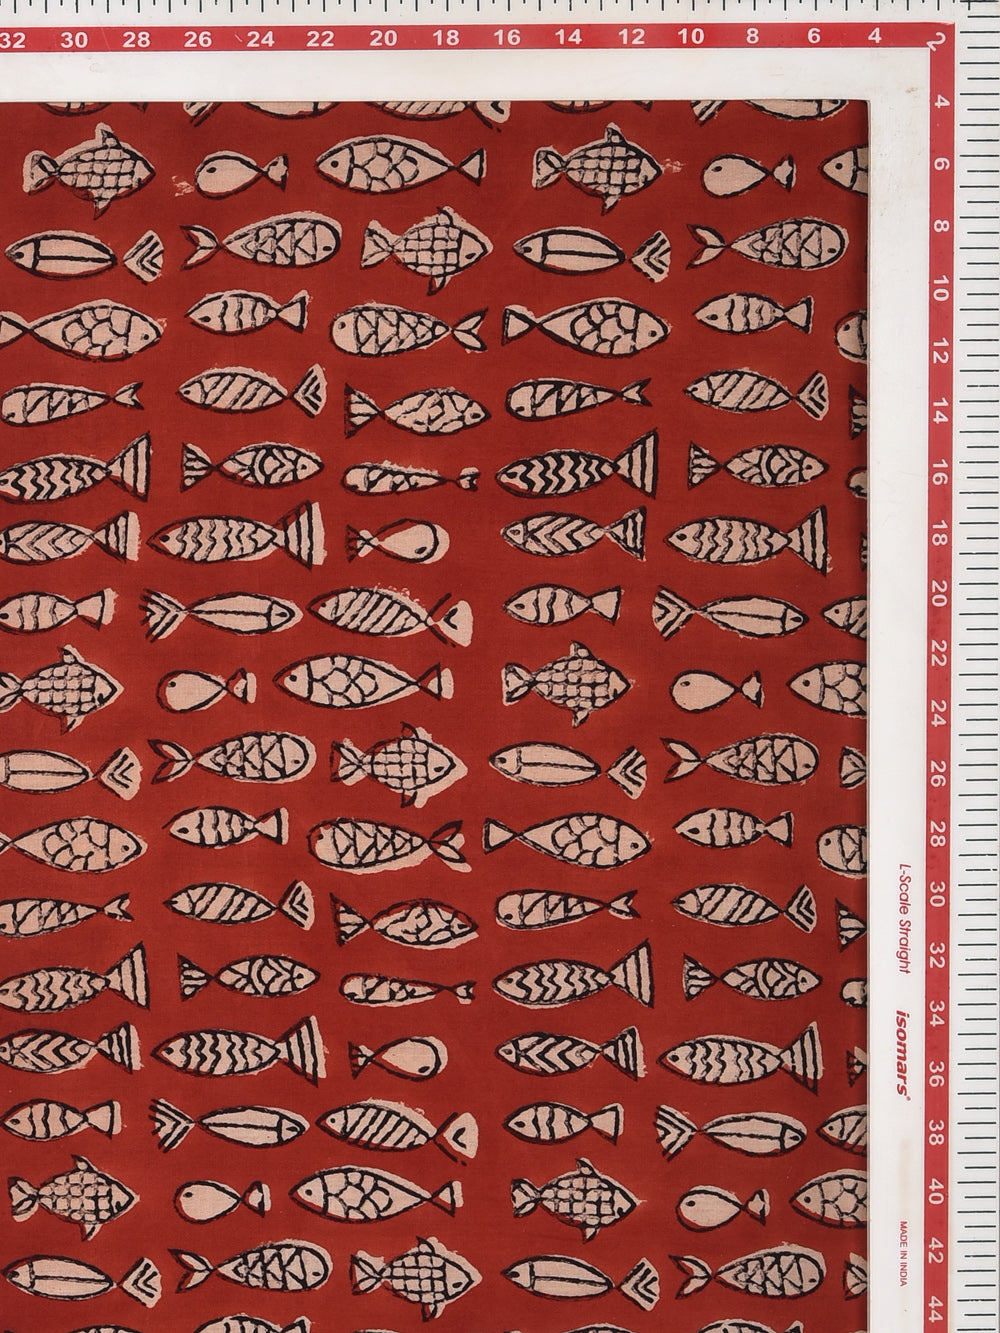 Red Bagru Natural Colour Matsya Fish with Black outline Animal Pattern Cotton Cambric Fabric